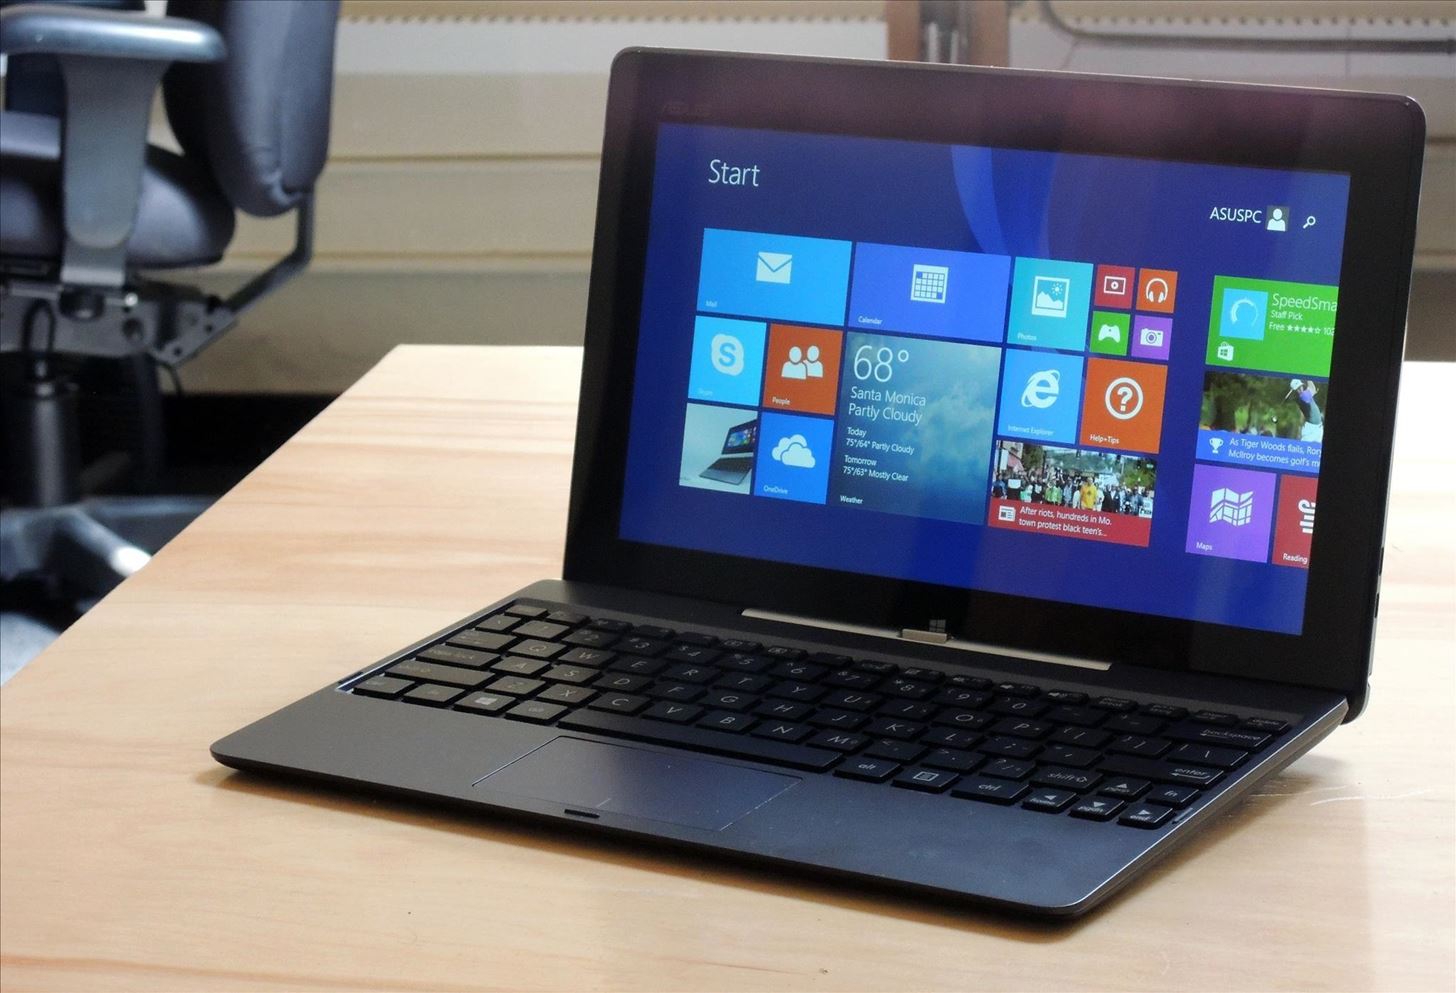 ASUS Transformer Book: The Tablet That Wants to Be Your Next Windows Laptop